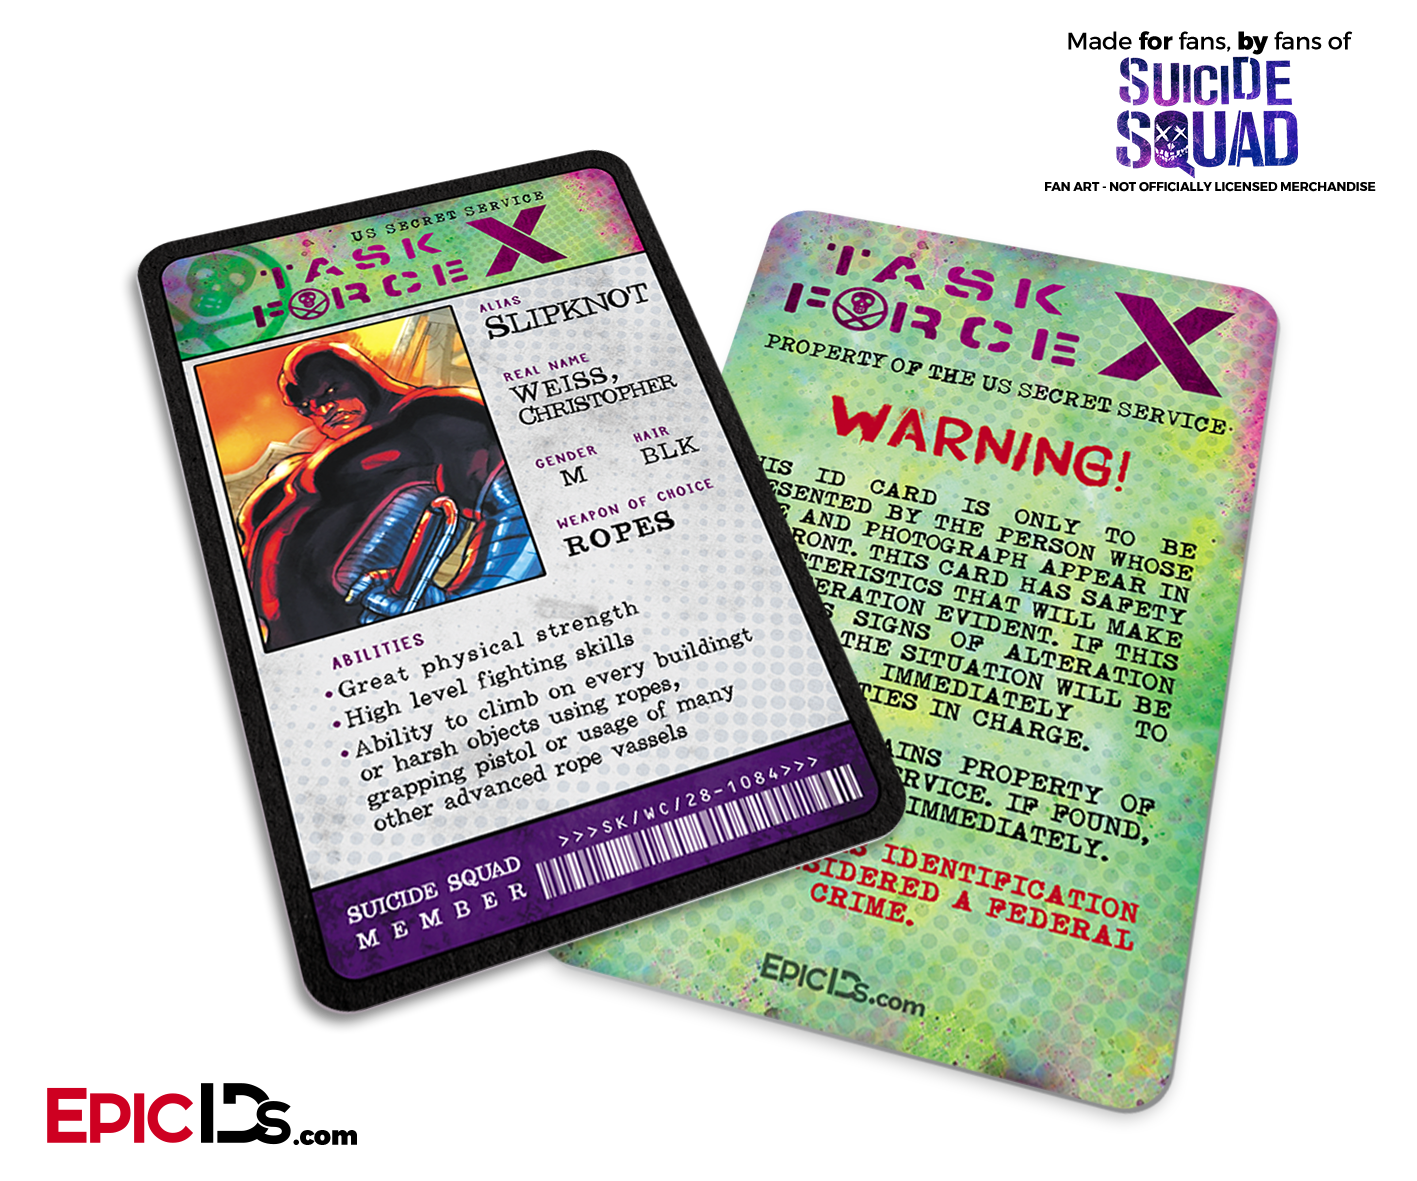 Task Force X 'Suicide Squad' Classic Comic ID Card - Slipknot / Christopher Weiss